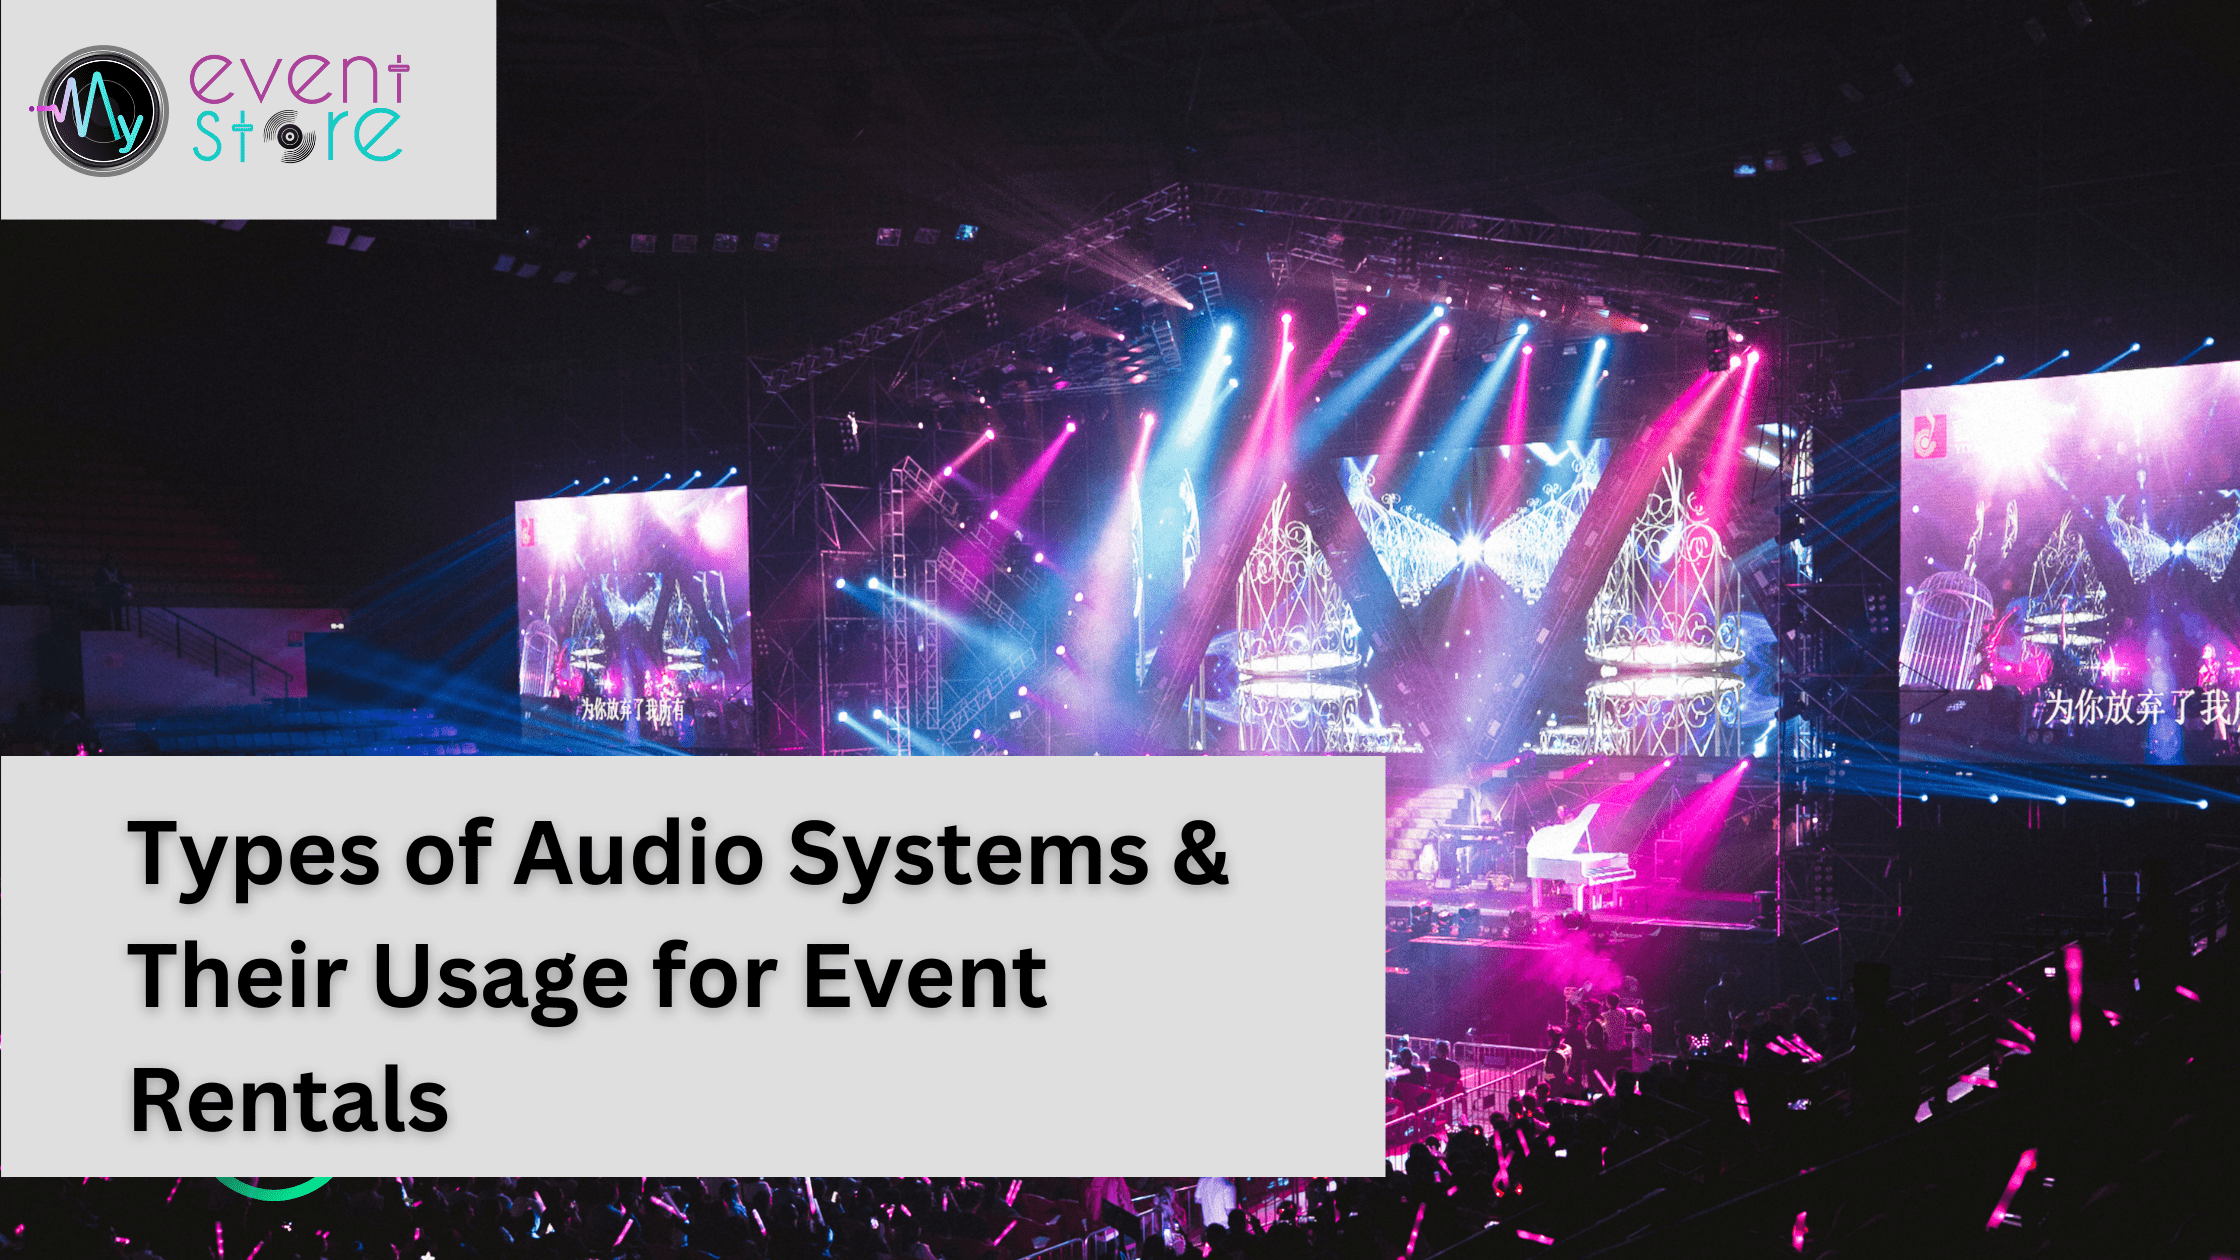 Types of Audio Systems & Their Usage for Event Rentals